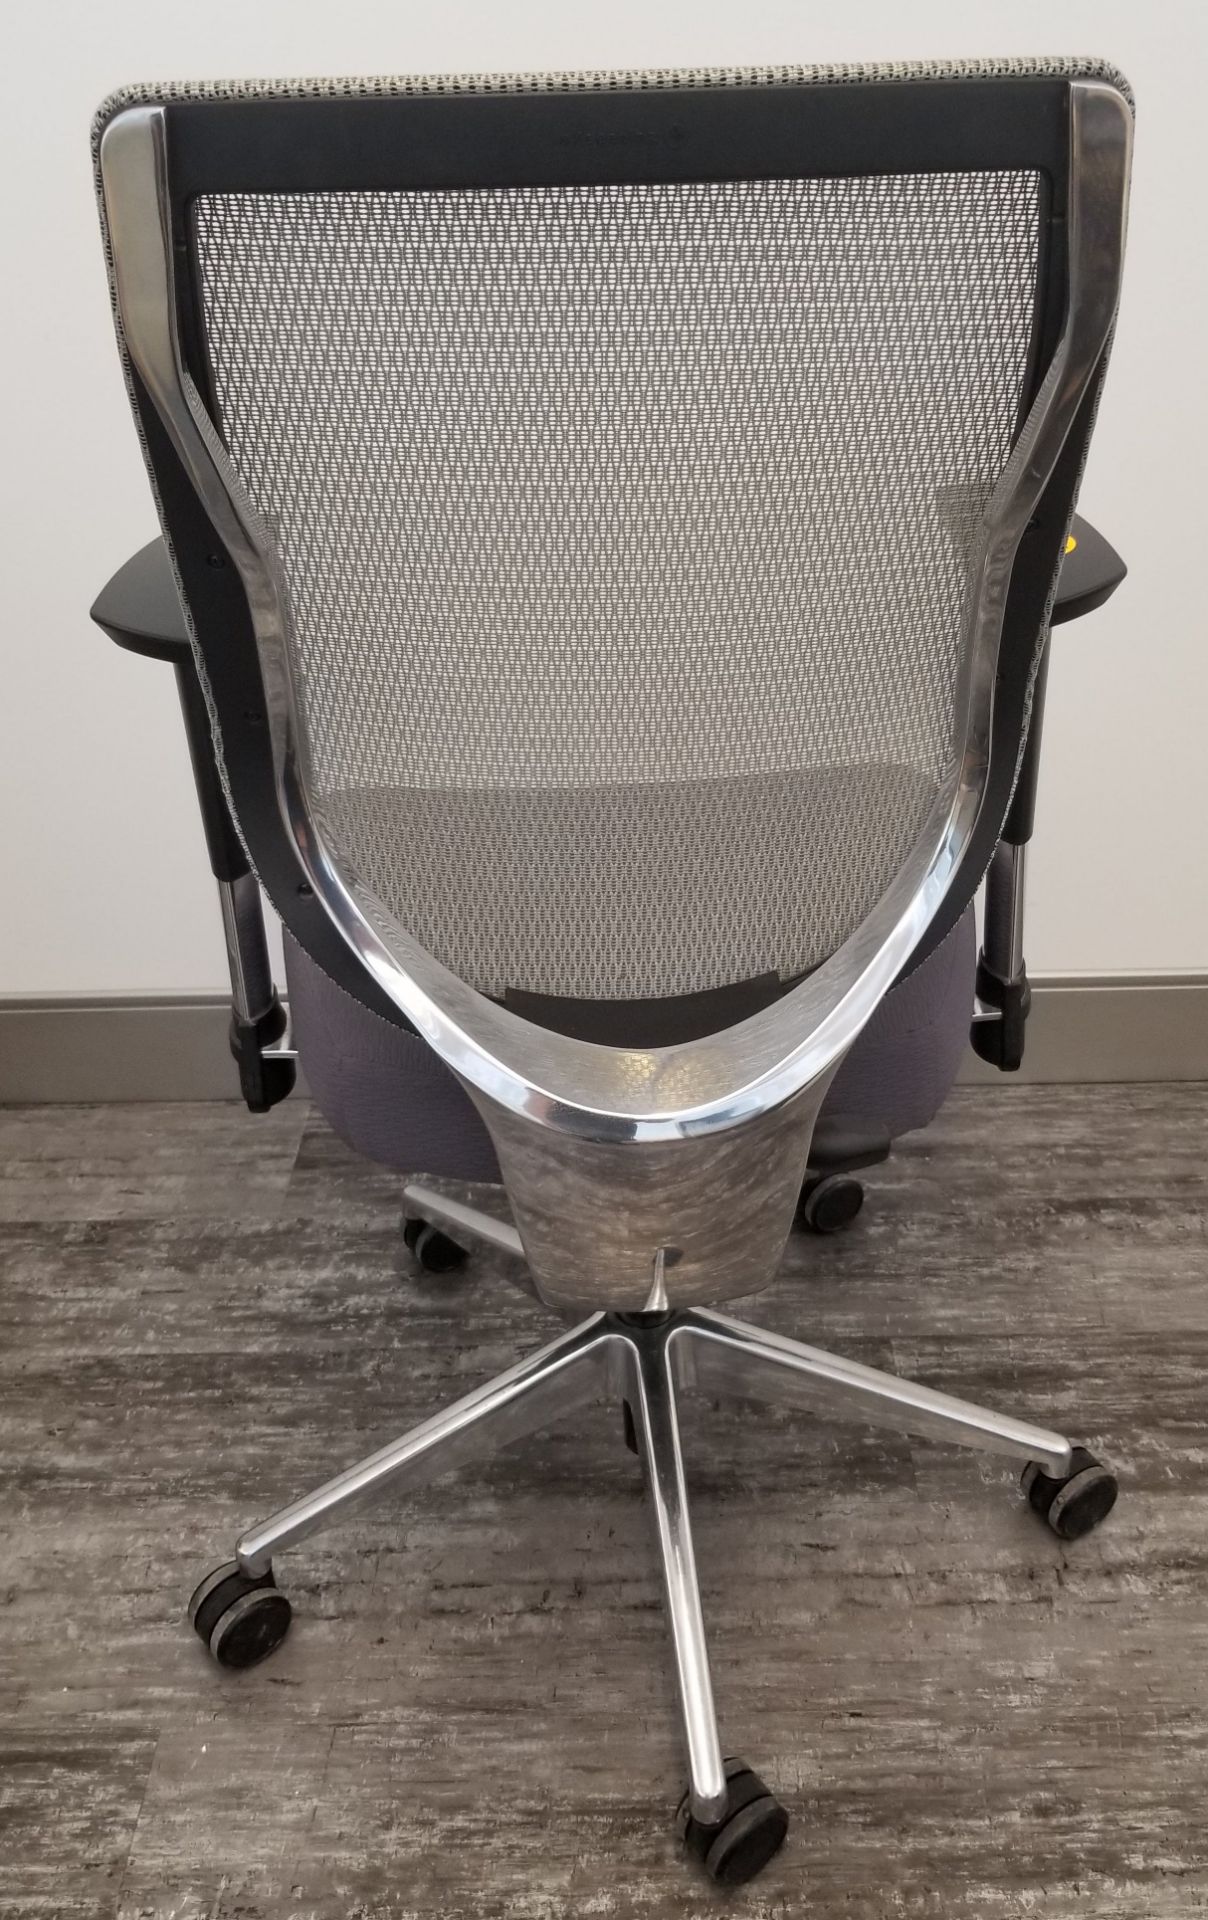 ALLSEATING - EXEC. CHAIR ON CASTERS, GREY W/ MESH BACK, ADJUSTABLE HEIGHT, ADJUSTABLE ARMS - Image 3 of 7